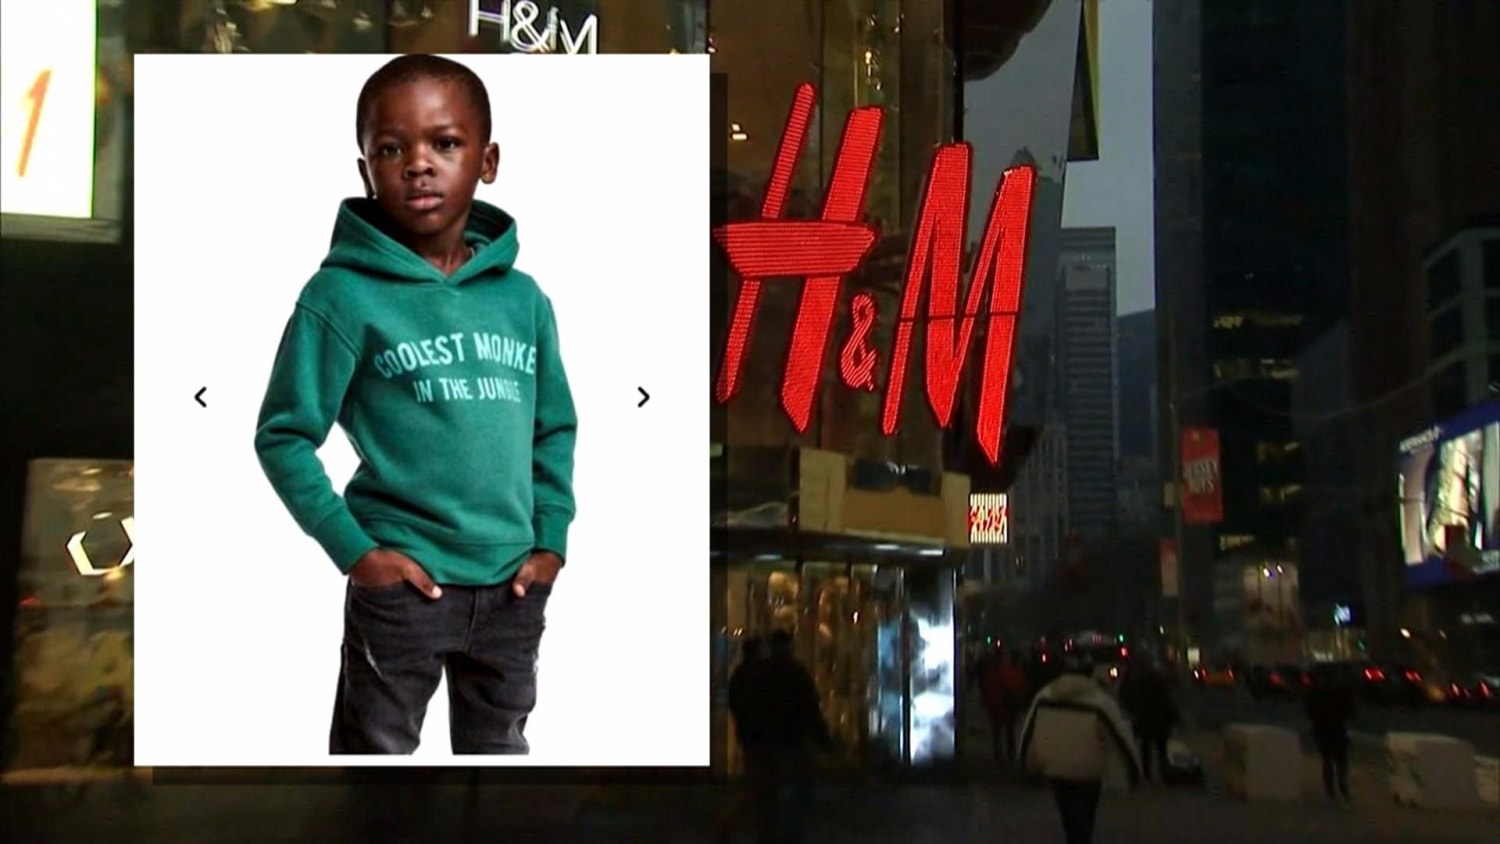 H&M Apologizes for 'Monkey' Image Featuring Black Child - The New York Times